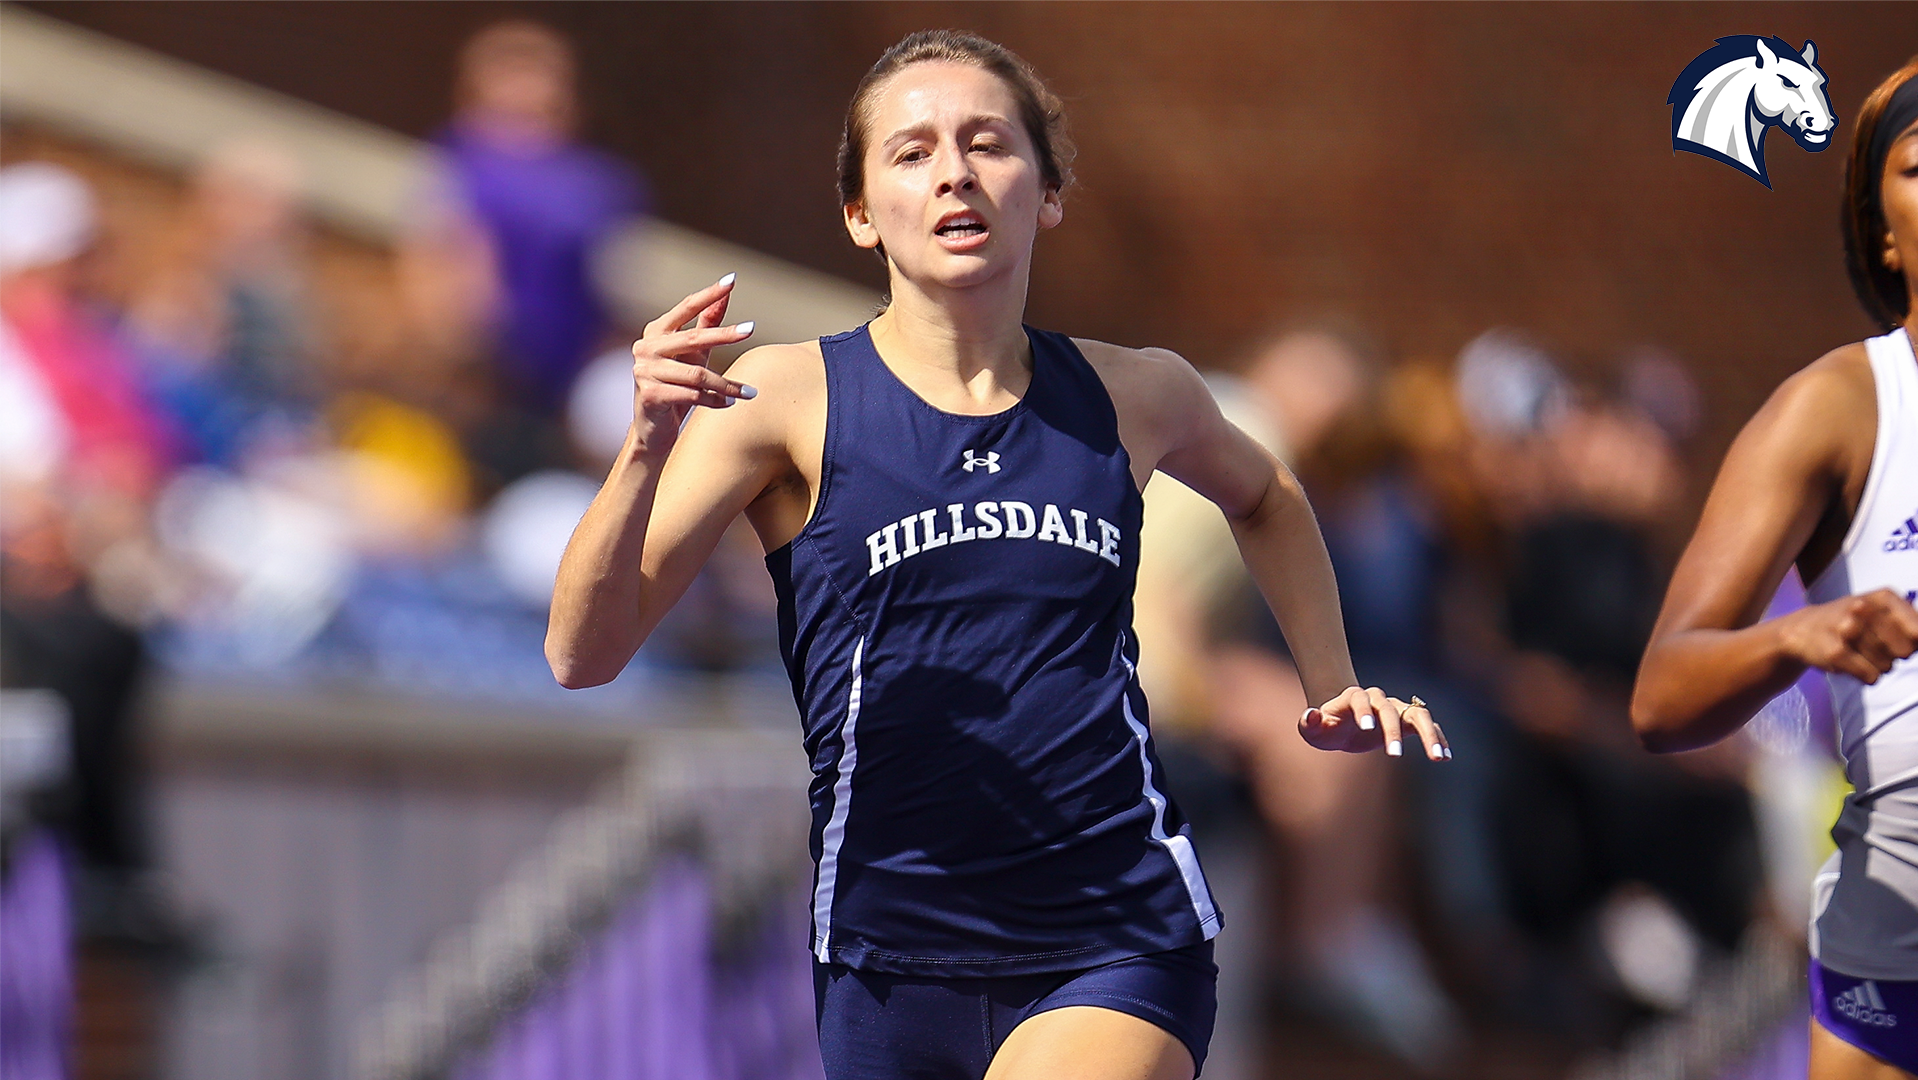 Chargers improve marks in final meets before NCAA DII Outdoor Championships field is announced